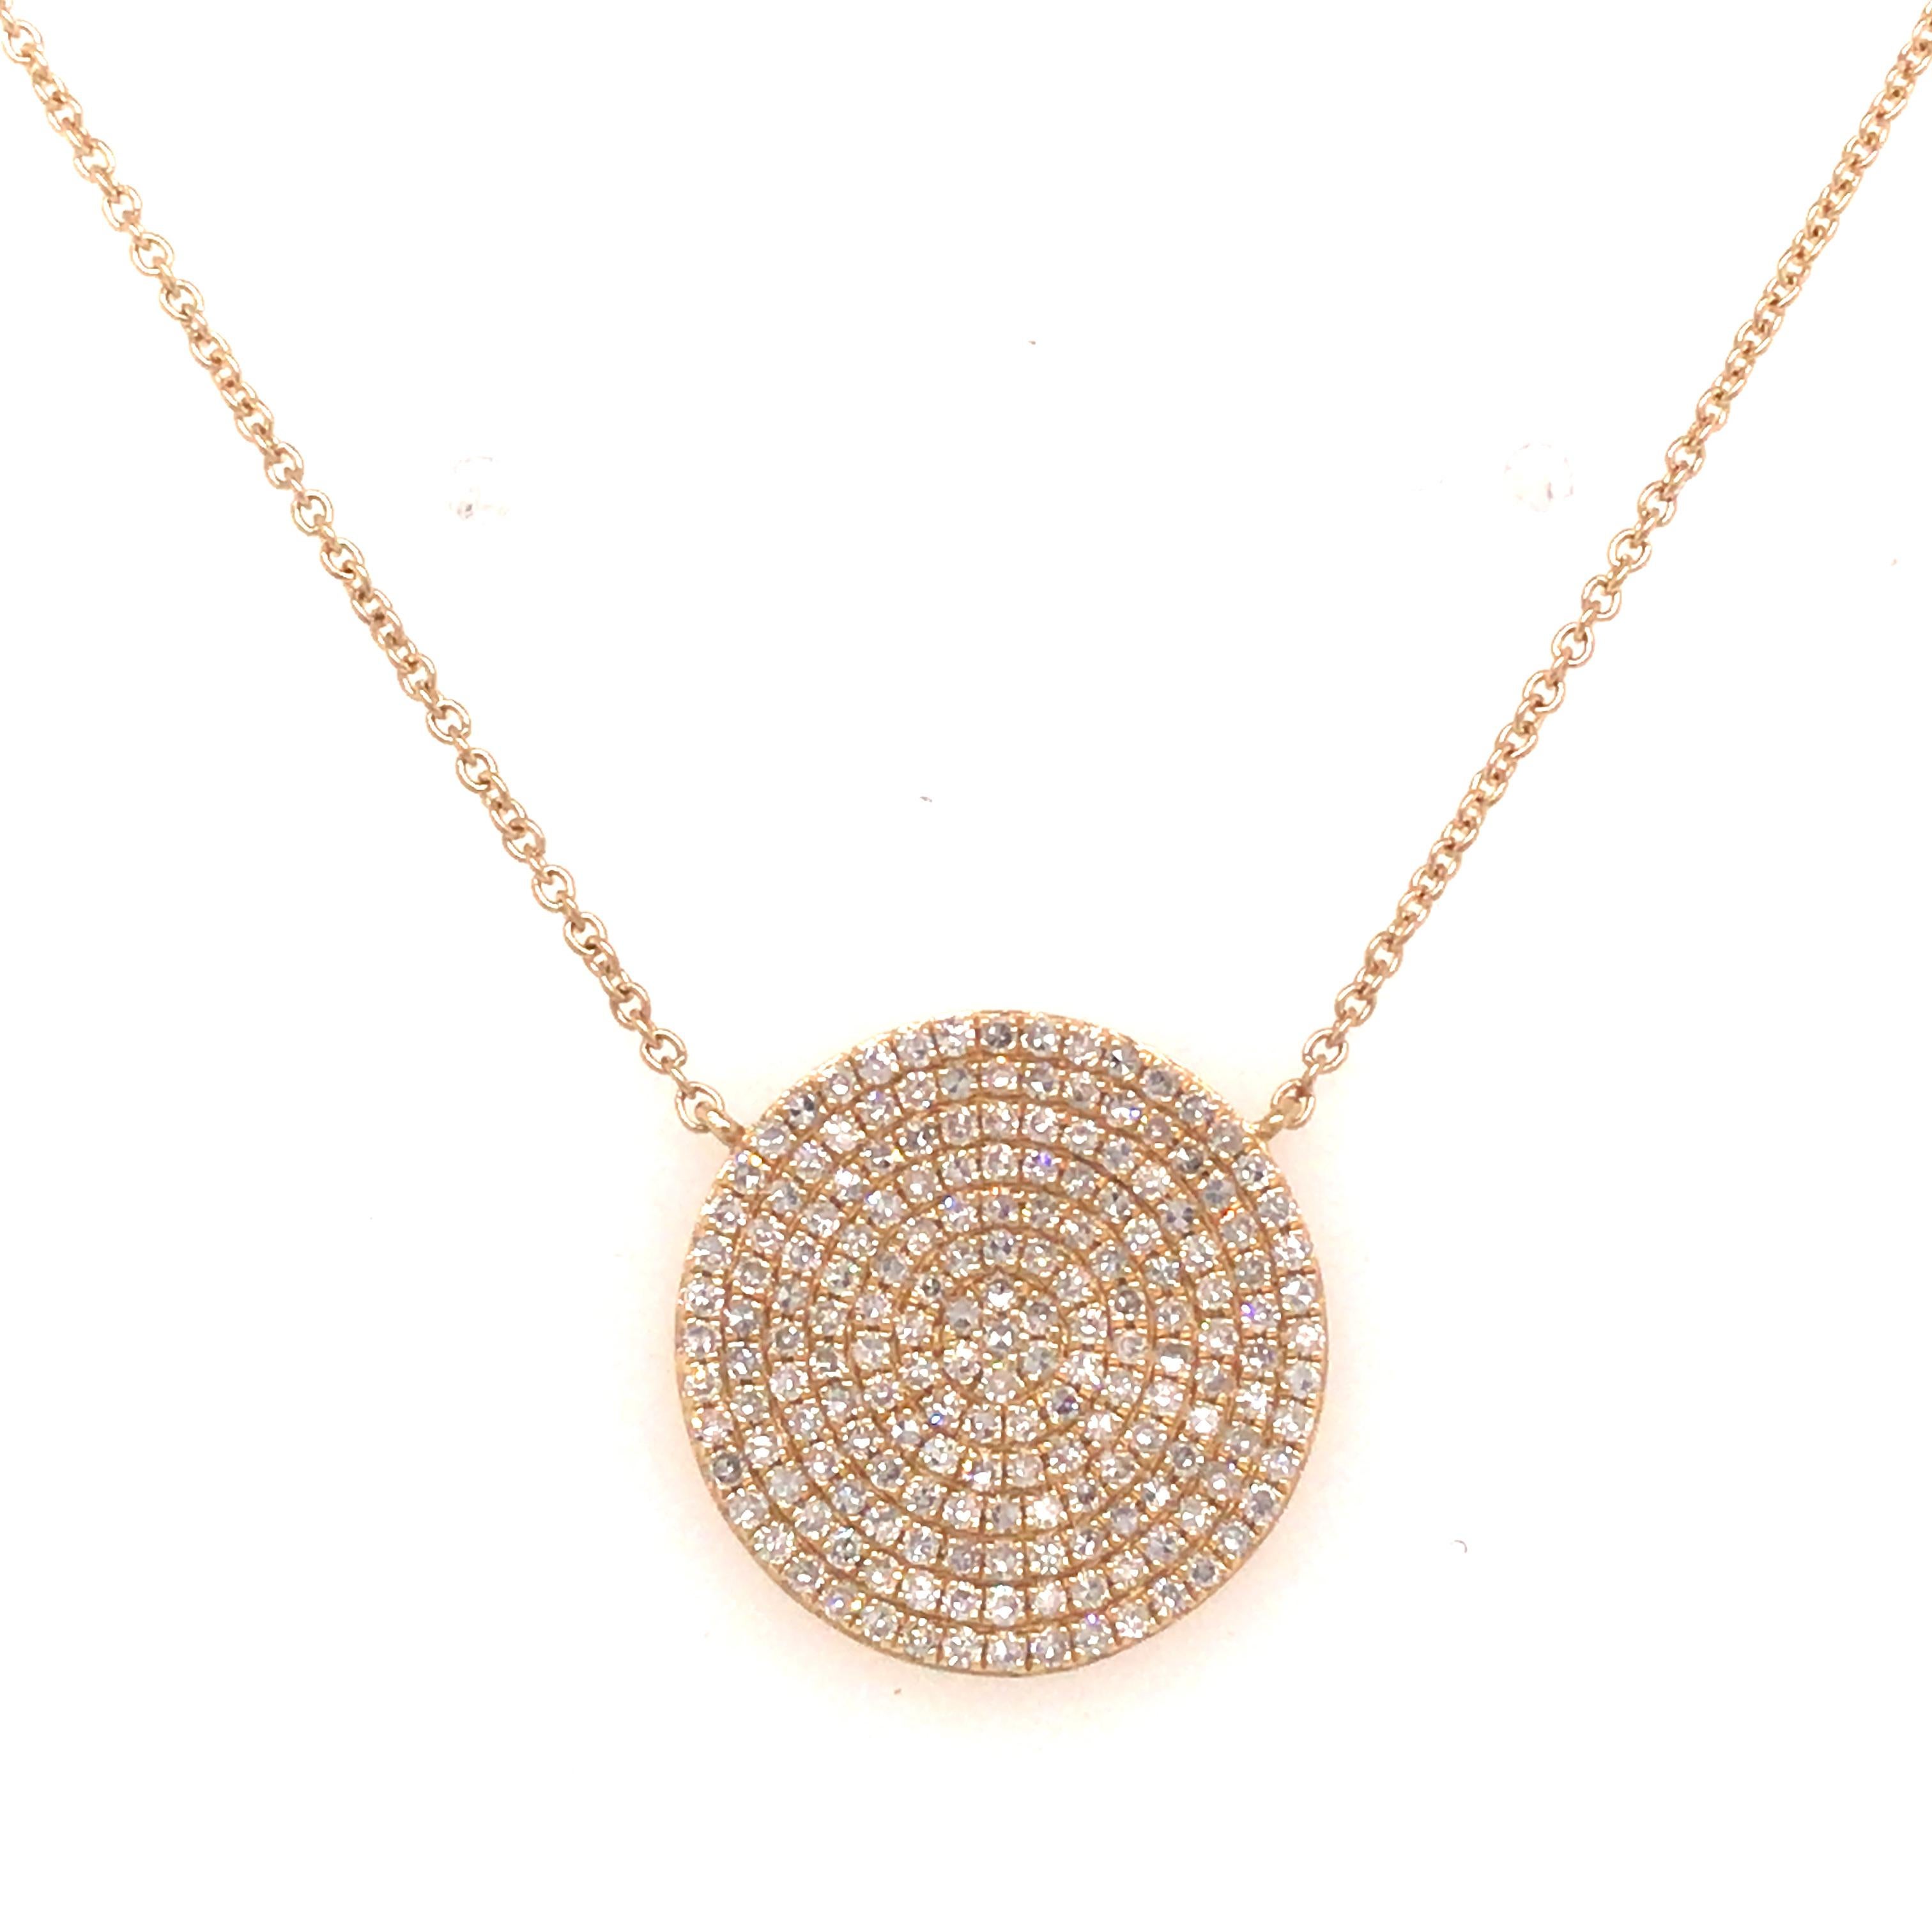 Diamond Pave Circle Disc Pendant Necklace in 14K Yellow Gold. (79) Round Brilliant Cut Diamonds weighing 0.58 carat total weight, G-H in color and VS in clarity are expertly set. The Necklace is adjustable in length at 18 inch, 17 inch, 16 inch and